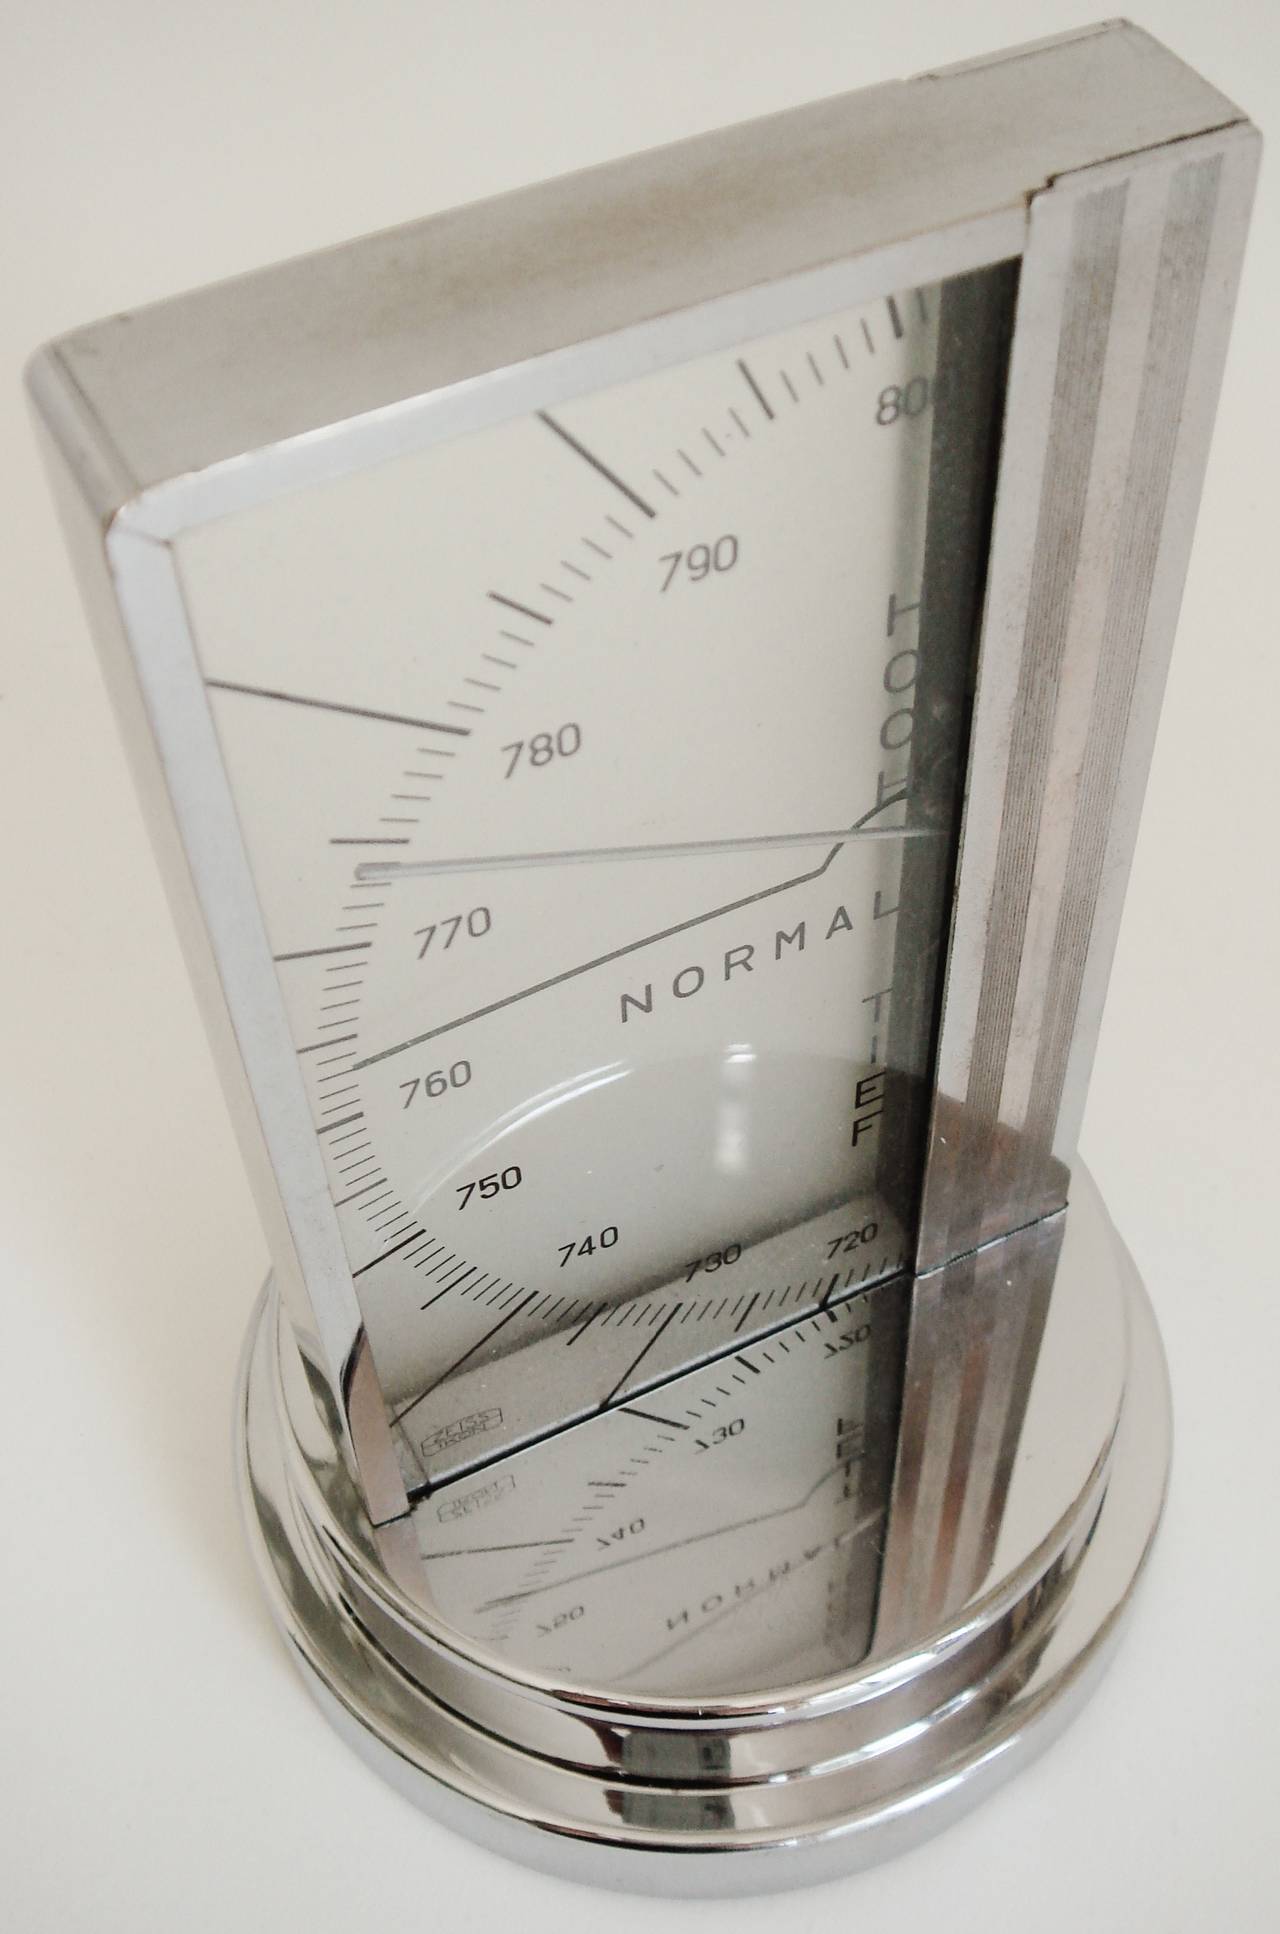 Etched High Quality German Art Deco Chrome Plated Aneroid Desk Barometer by Zeiss Ikon.